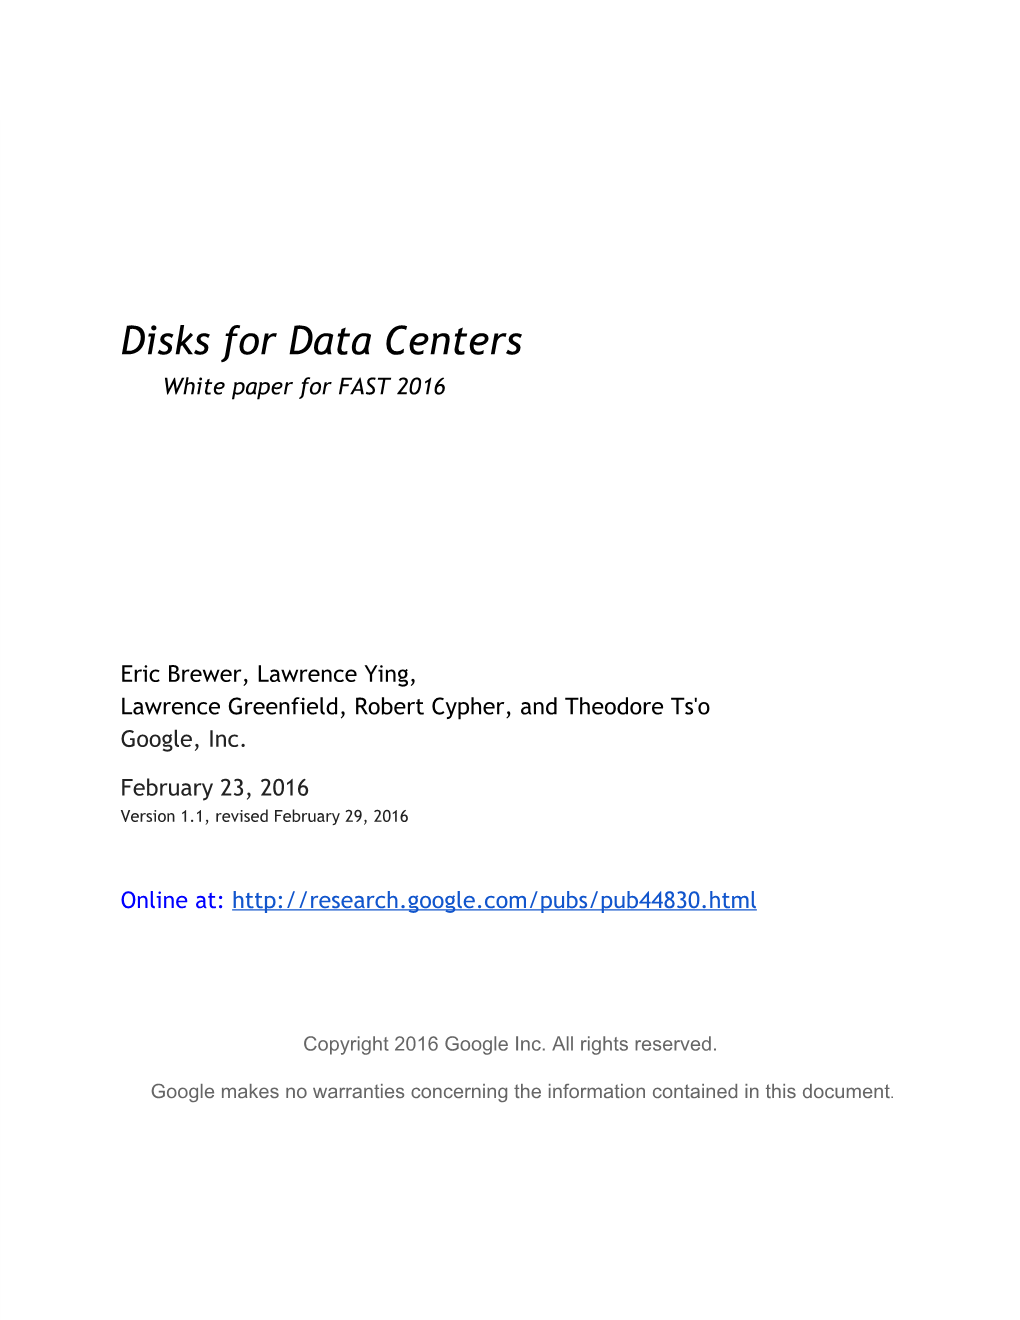 Disks for Data Centers White Paper for FAST 2016